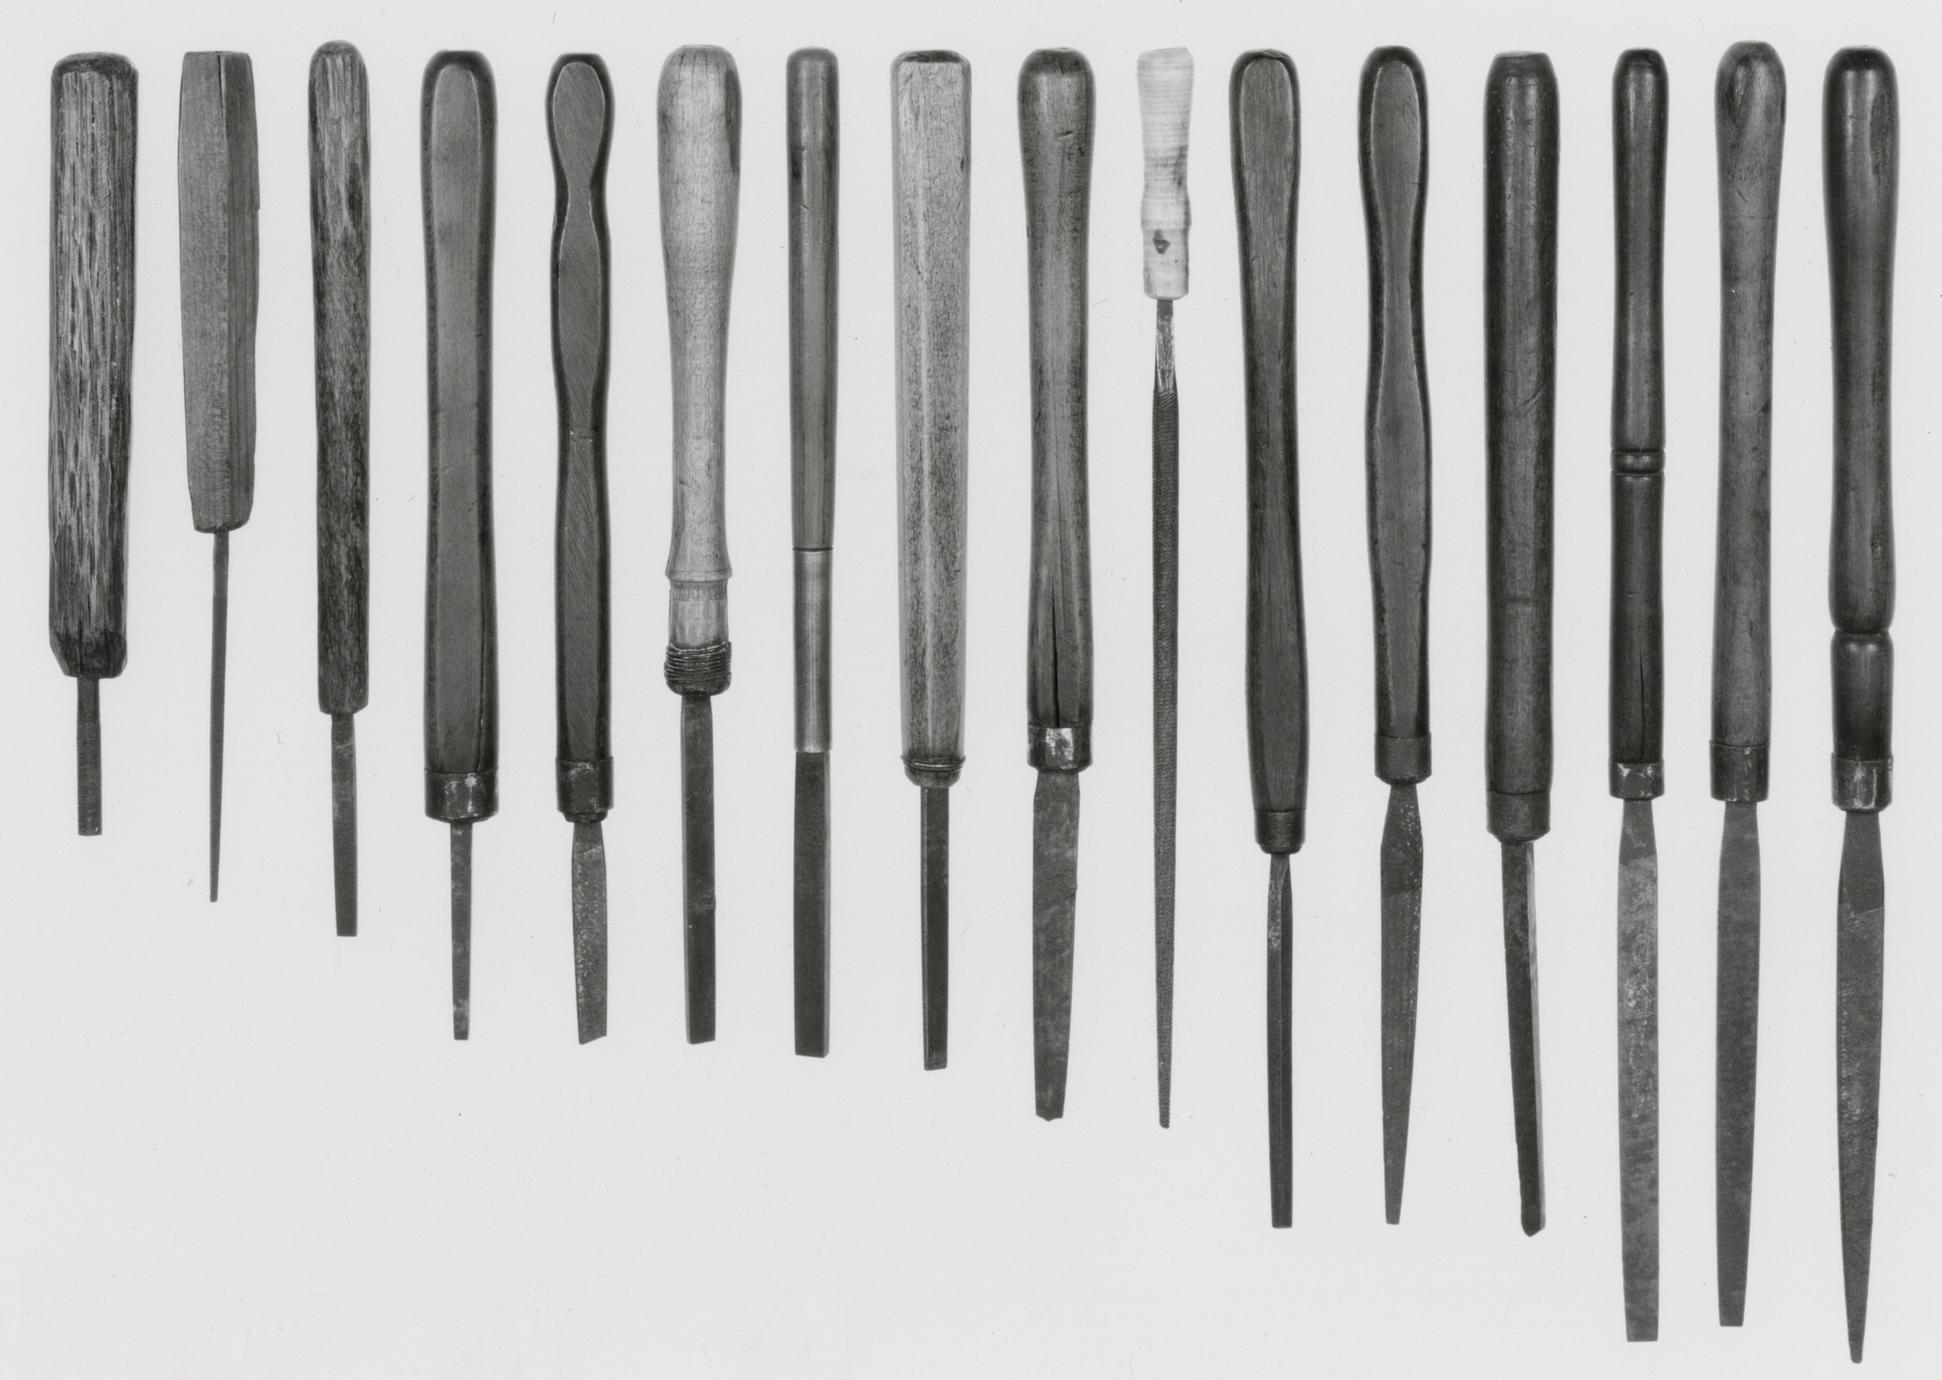 Black and white photograph of various files.